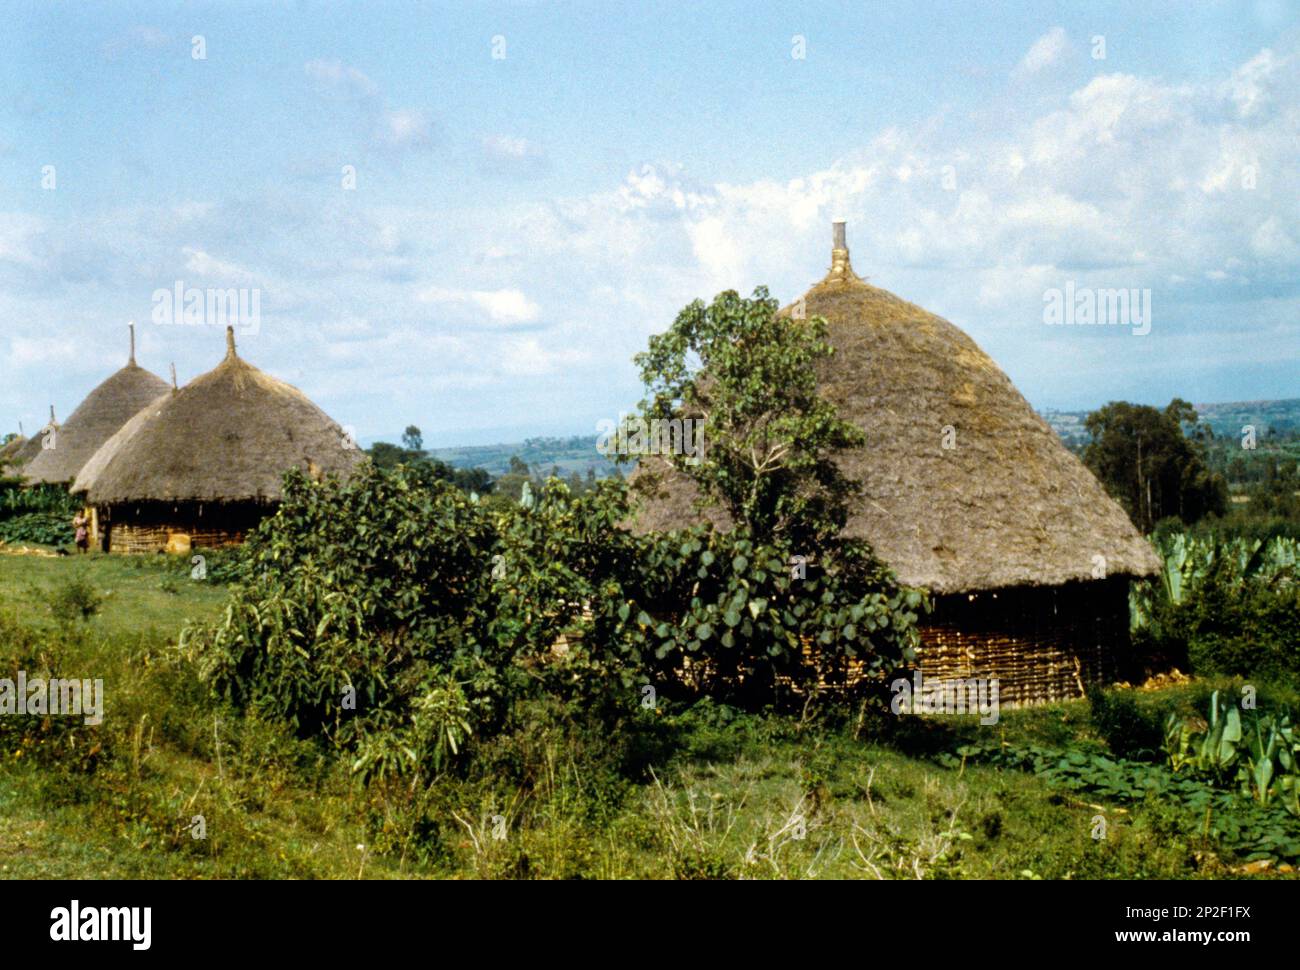 Ethiopia Nr Glibe Thatched Roof Huts in Village Stock Photo